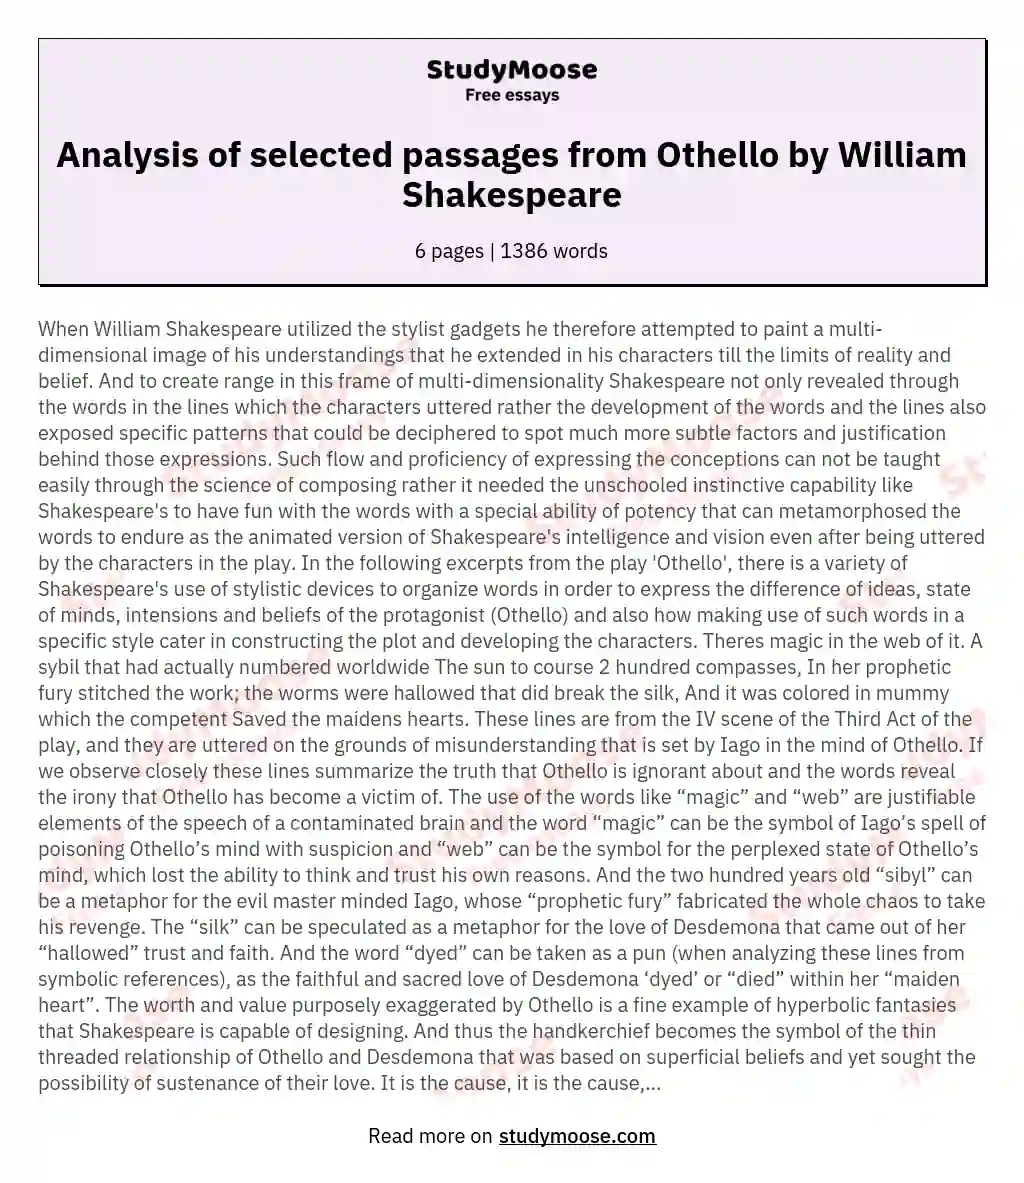 Analysis of selected passages from Othello by William Shakespeare